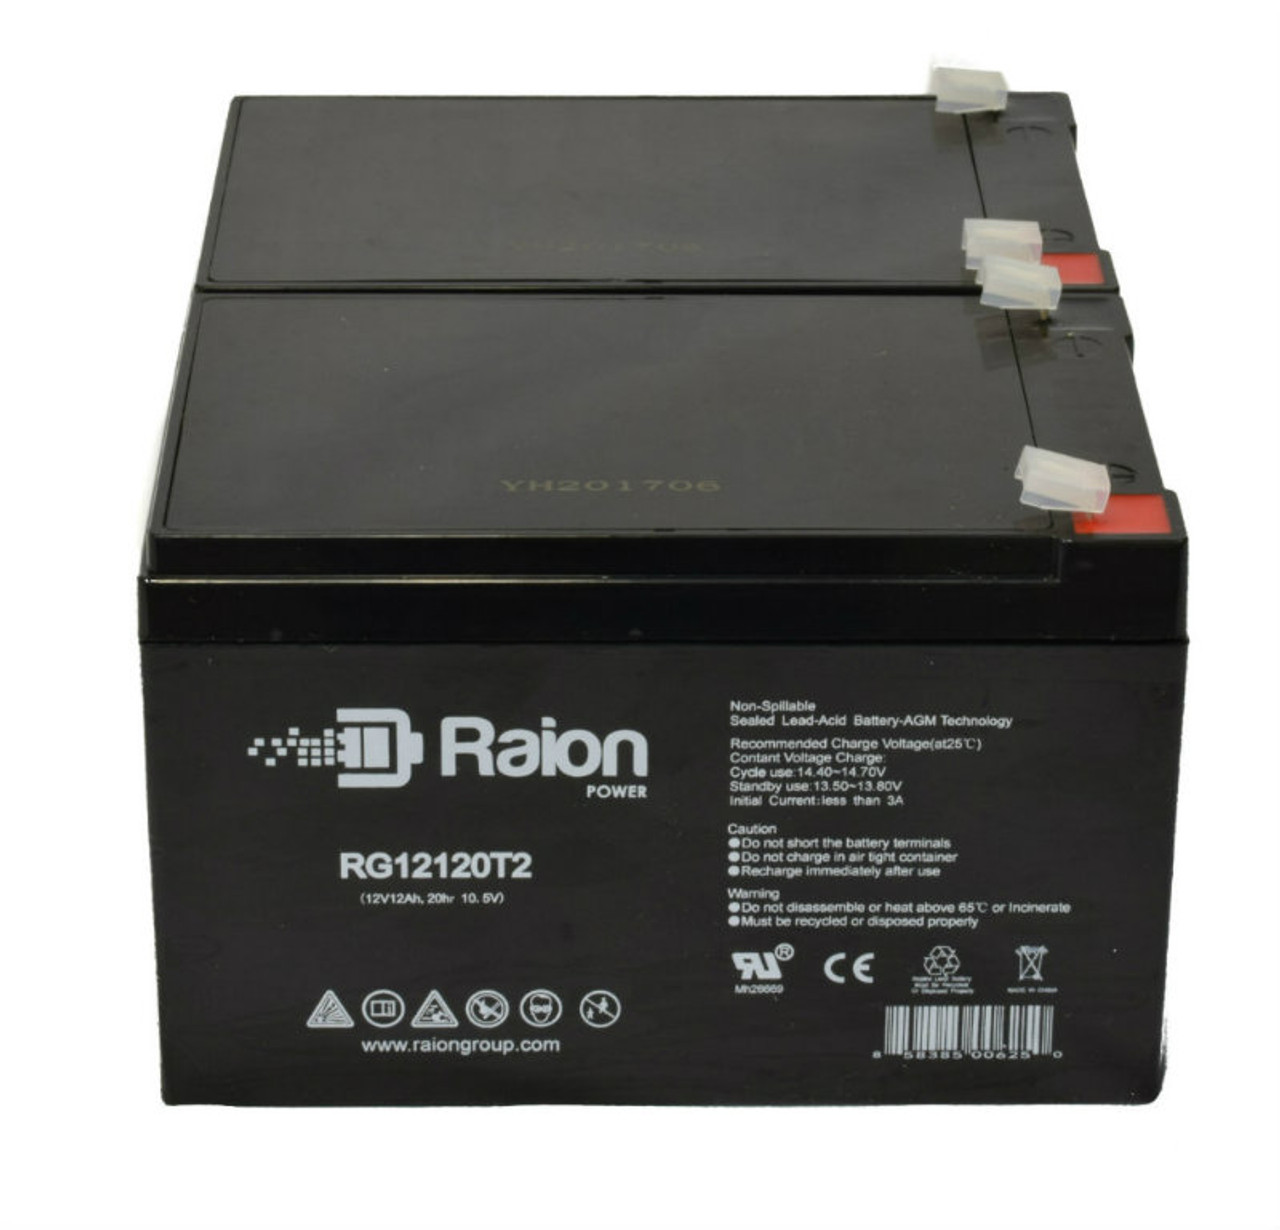 Raion Power RG12120T2 Replacement Battery Set for Golden Technologies Buzzaround Lite 3 Wheel Scooter Mobility Scooter - 2 Pack